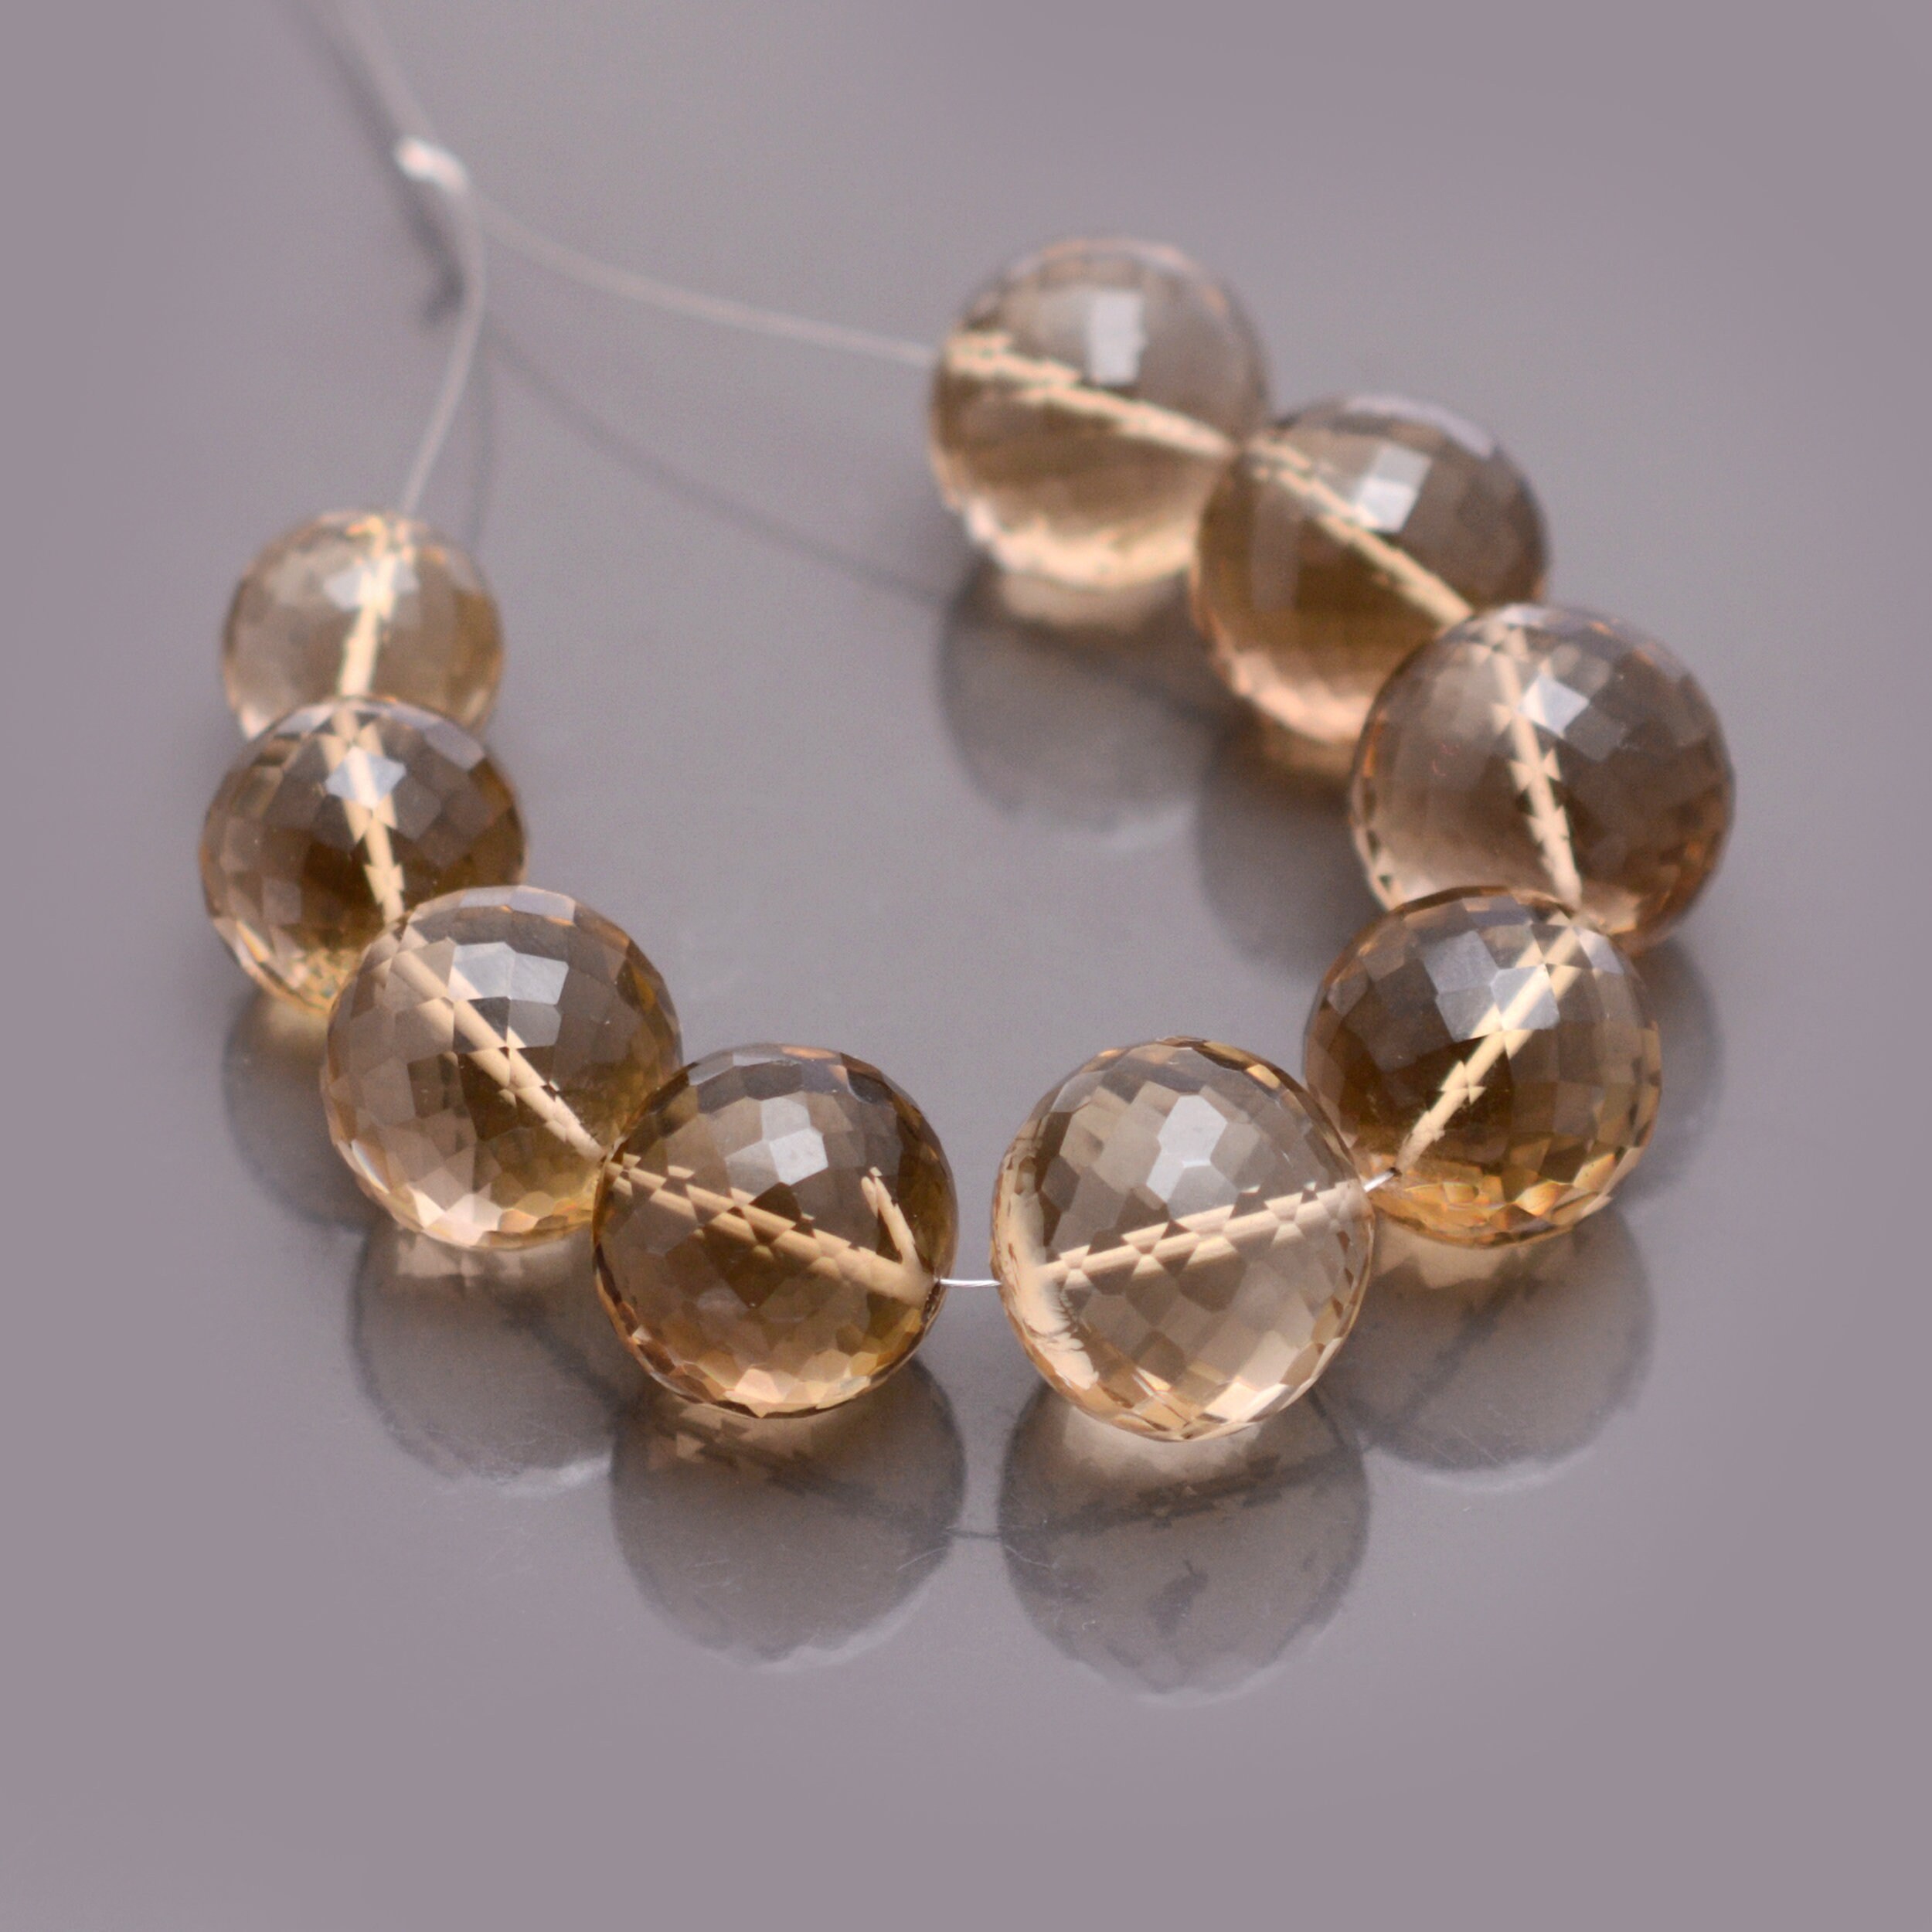 AAA Champagne Citrine Faceted Round Semi Precious Gemstone Beads 